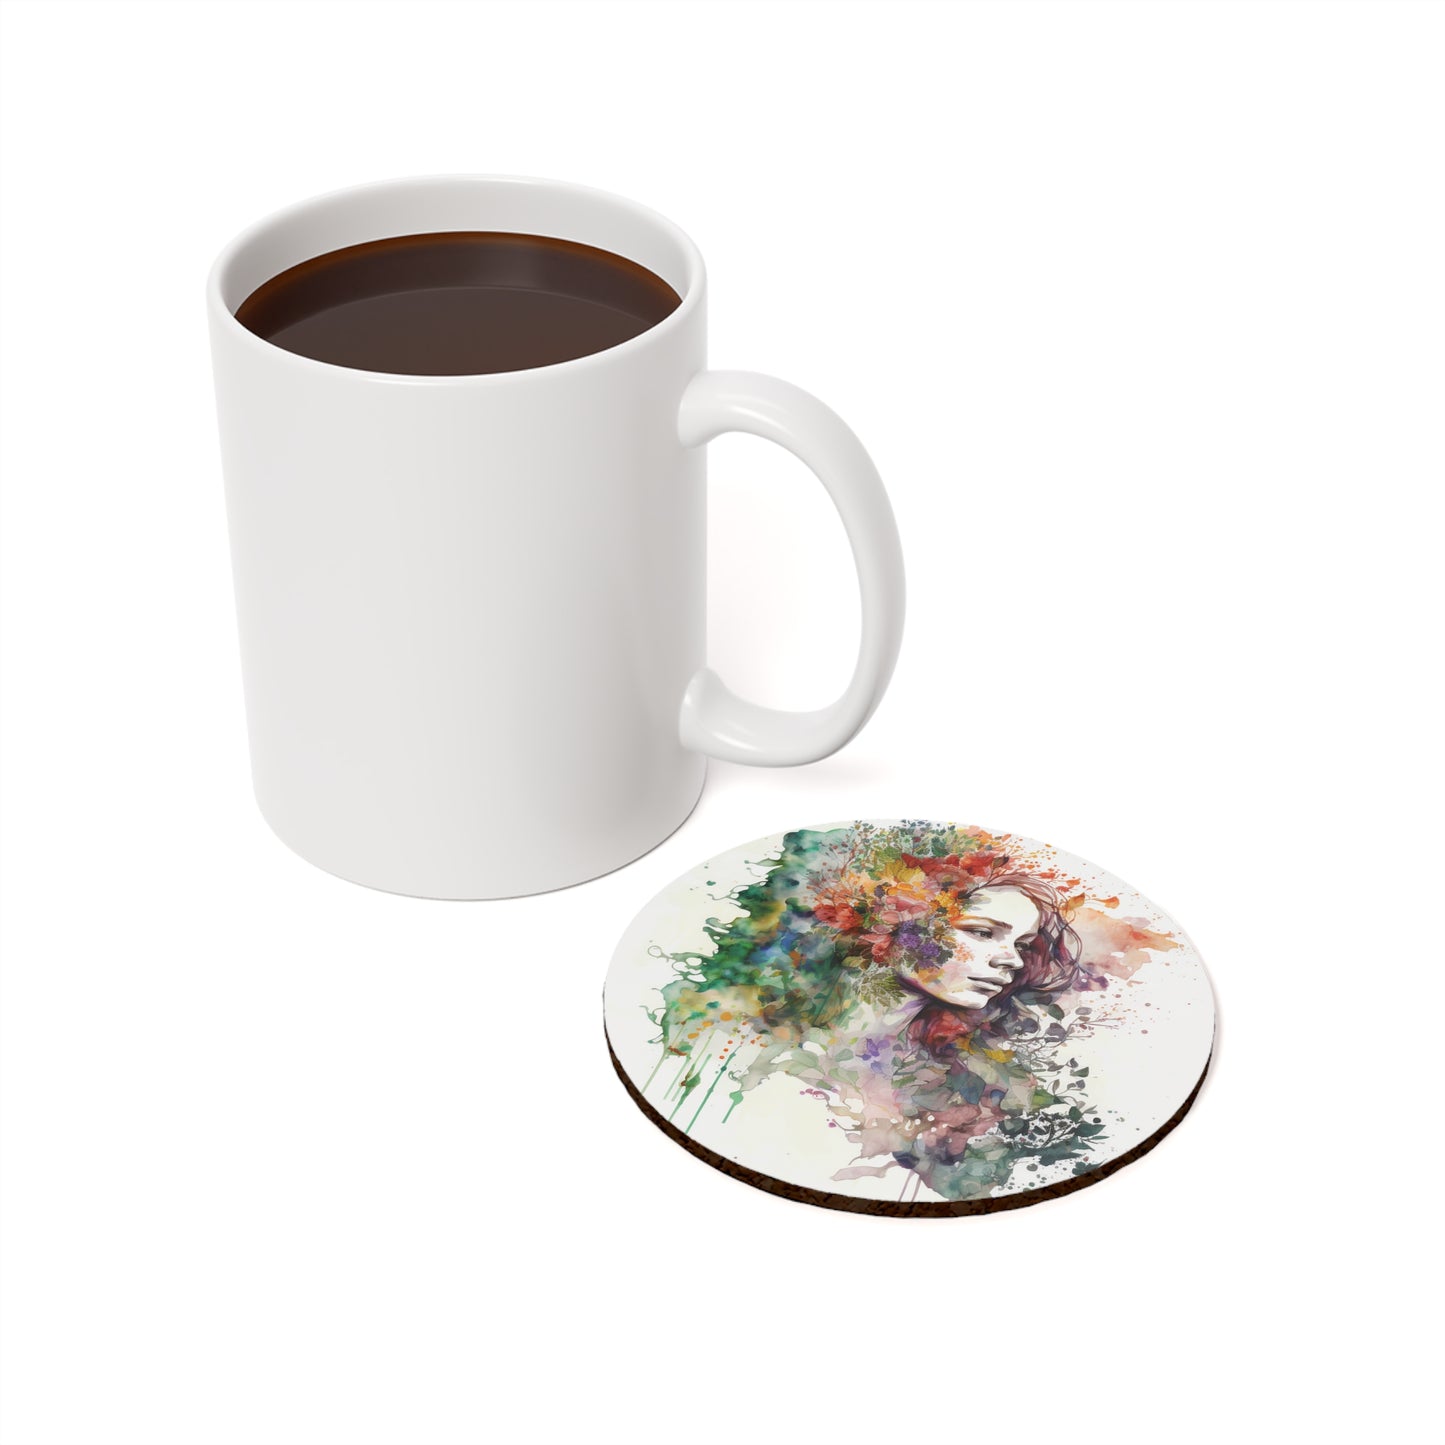 Cork Back Coaster Mother Nature Bright Spring Colors Realistic Watercolor 3